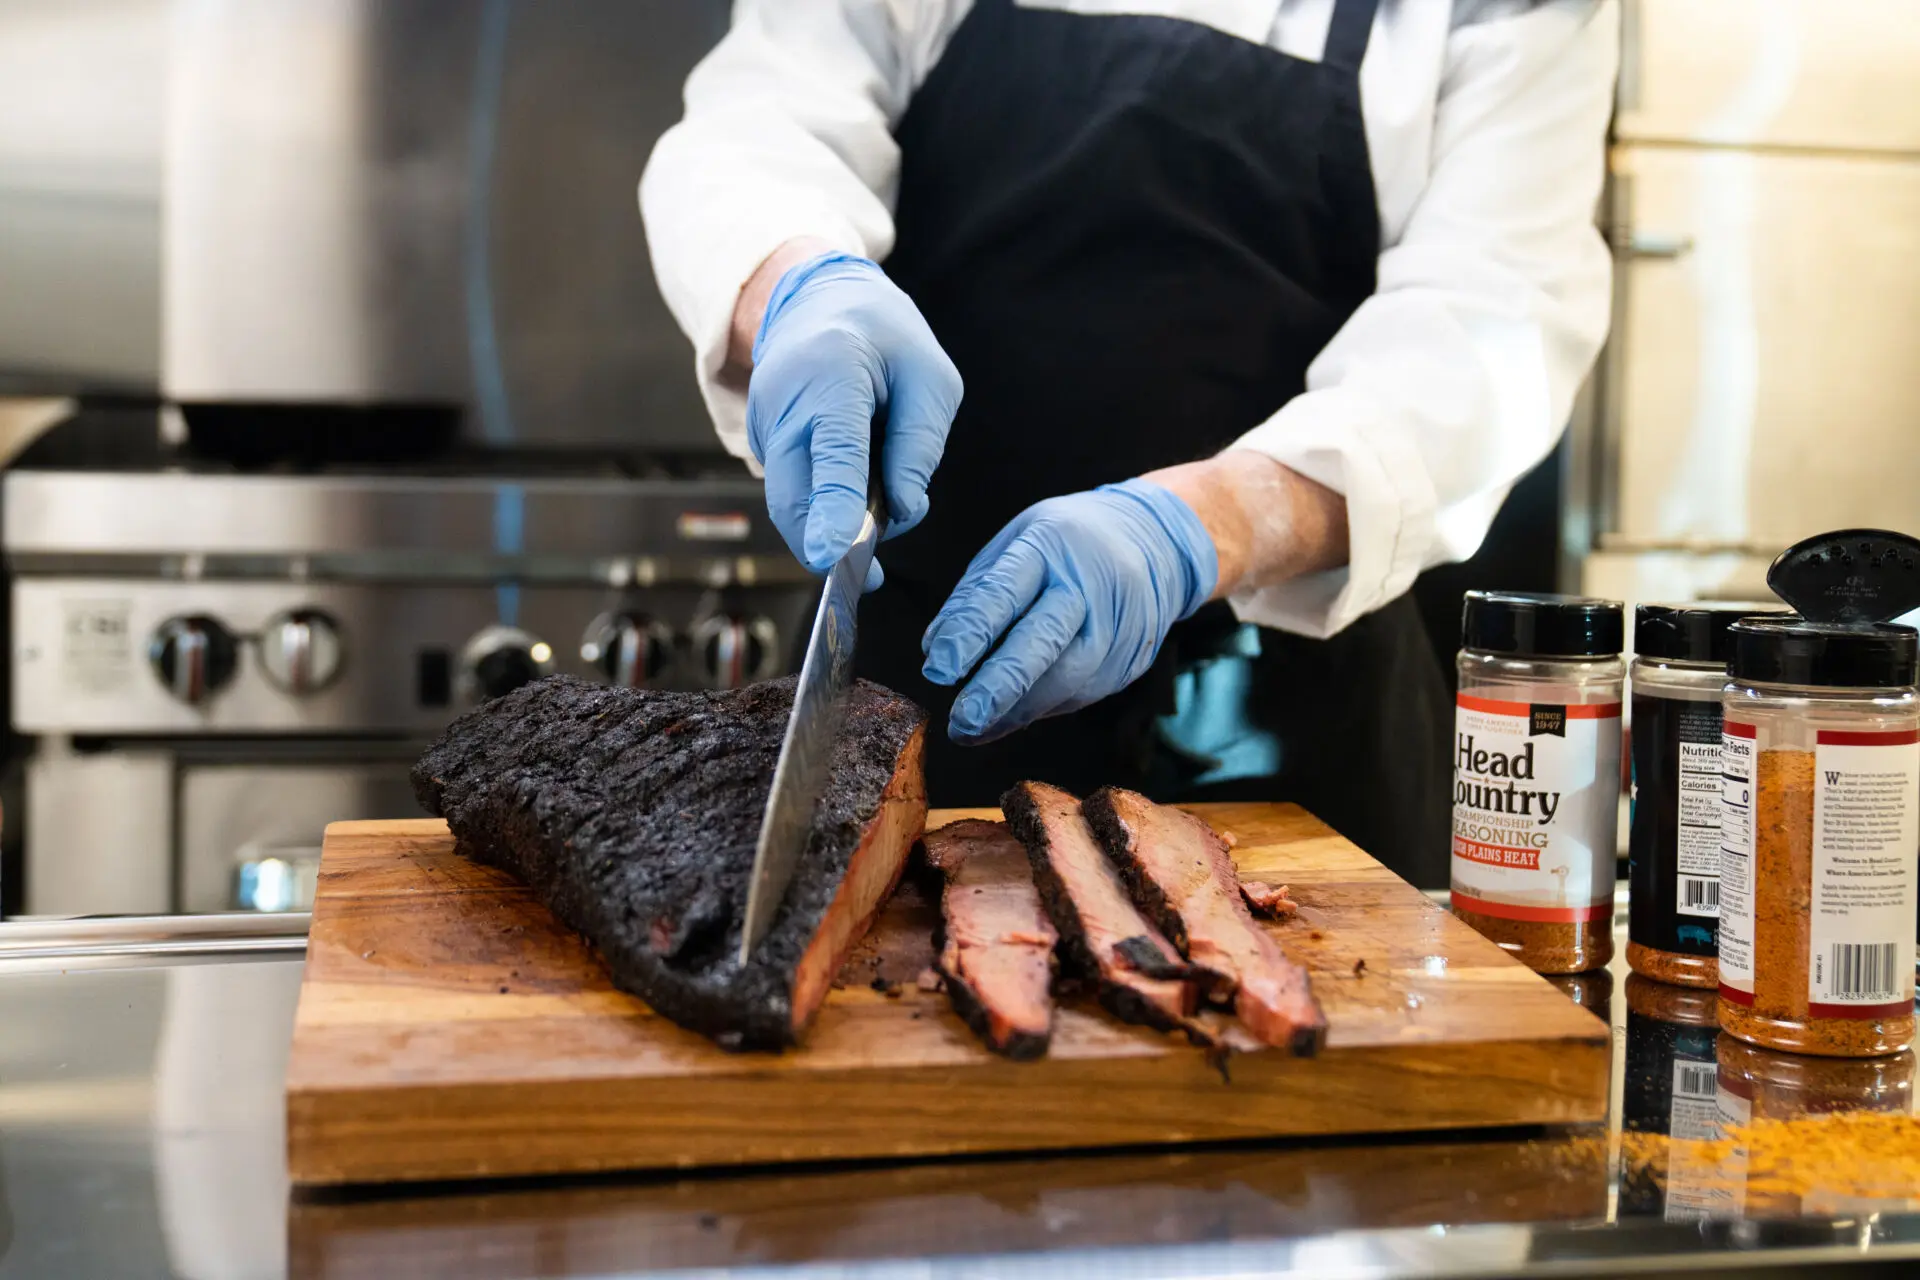 Chef slices spiced brisket on butcher block in OWS Foods test kitchen with